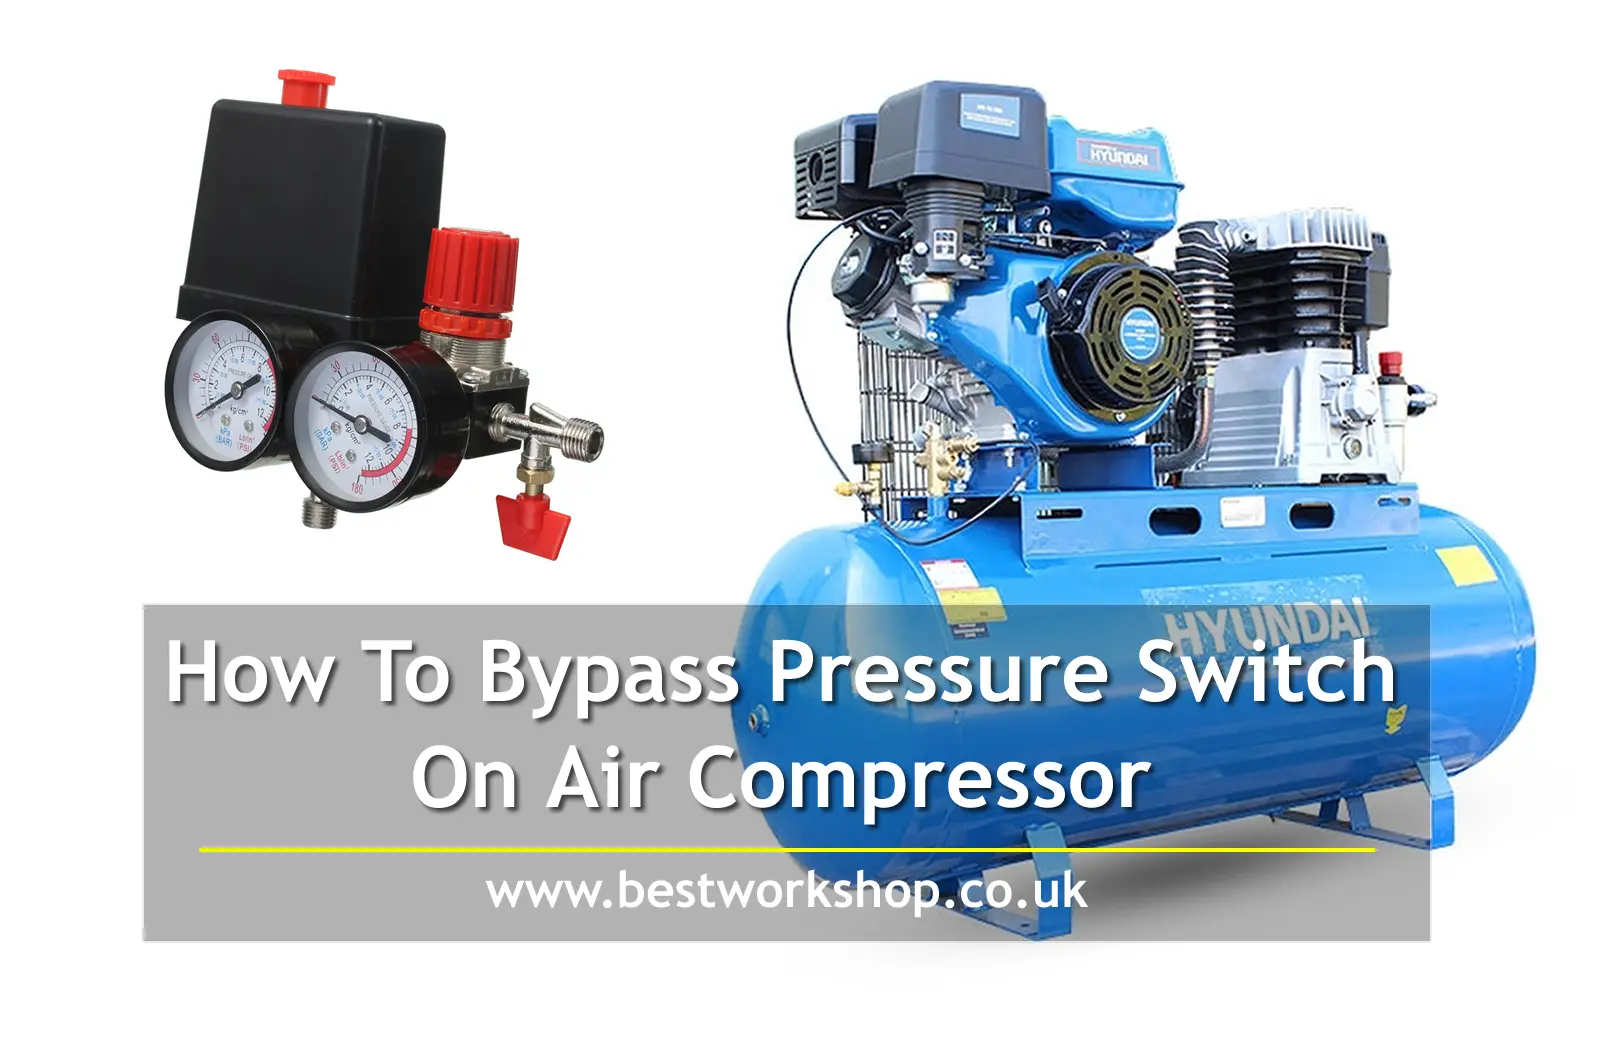 How To Bypass Pressure Switch On Air Compressor